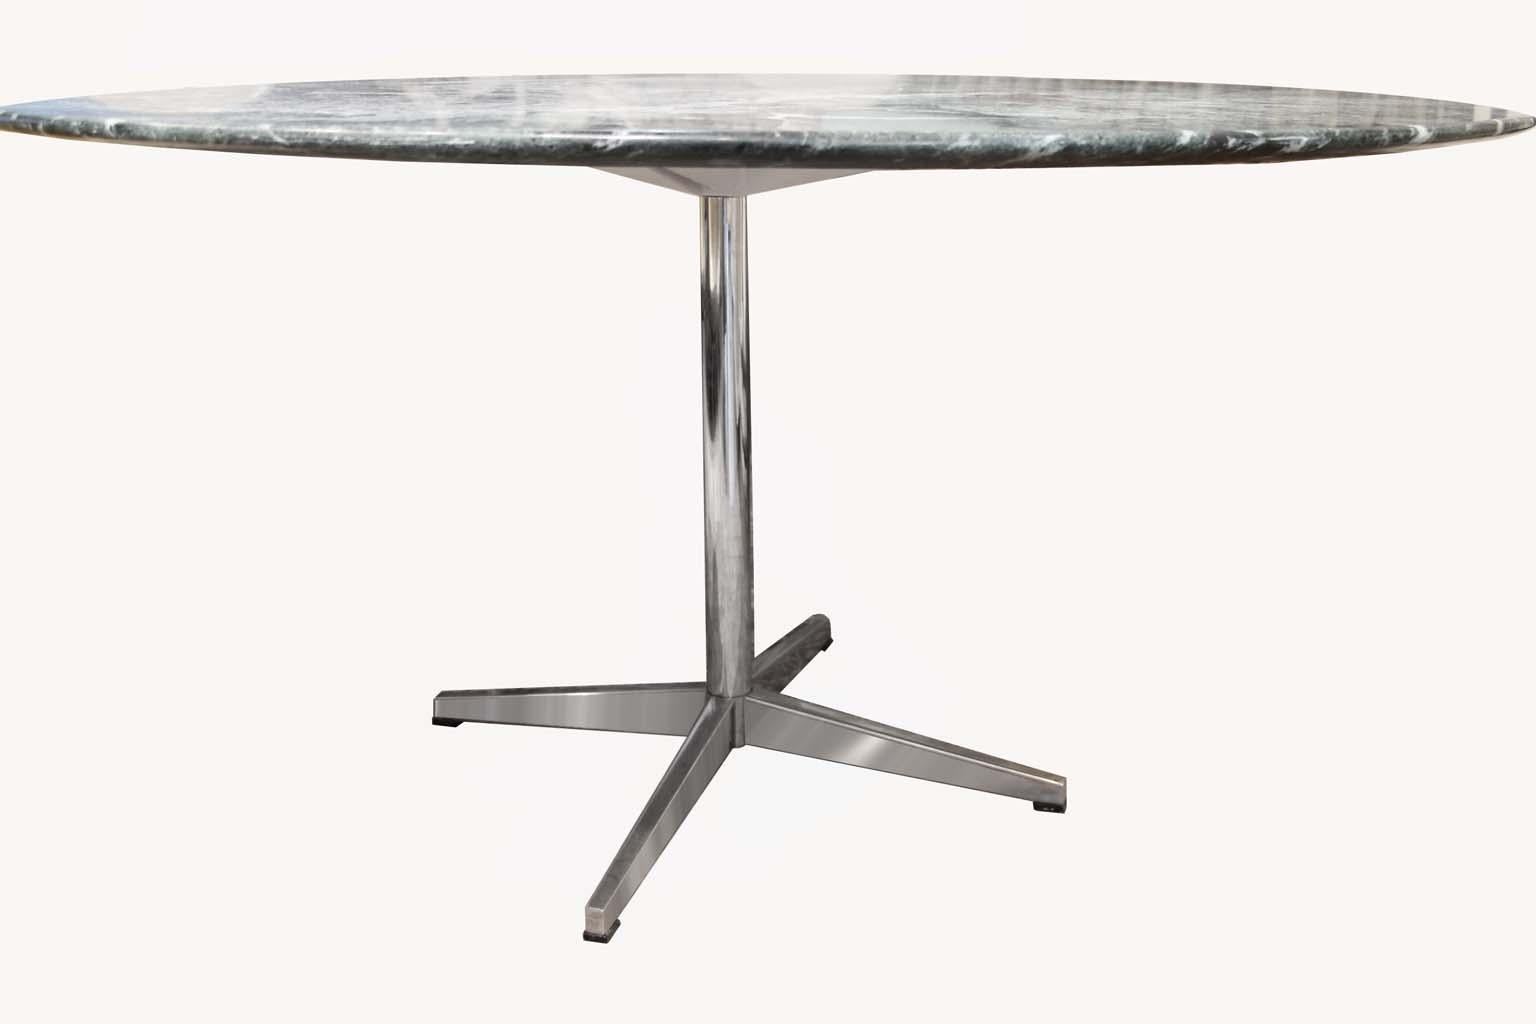 Beautiful marble-top table from the talented Florence Knoll. Heavy dense marble top with an amazing texture and color. Solid chrome base, balances perfectly below the delicate looking top. An amazing design to be so solid and hefty but look so light